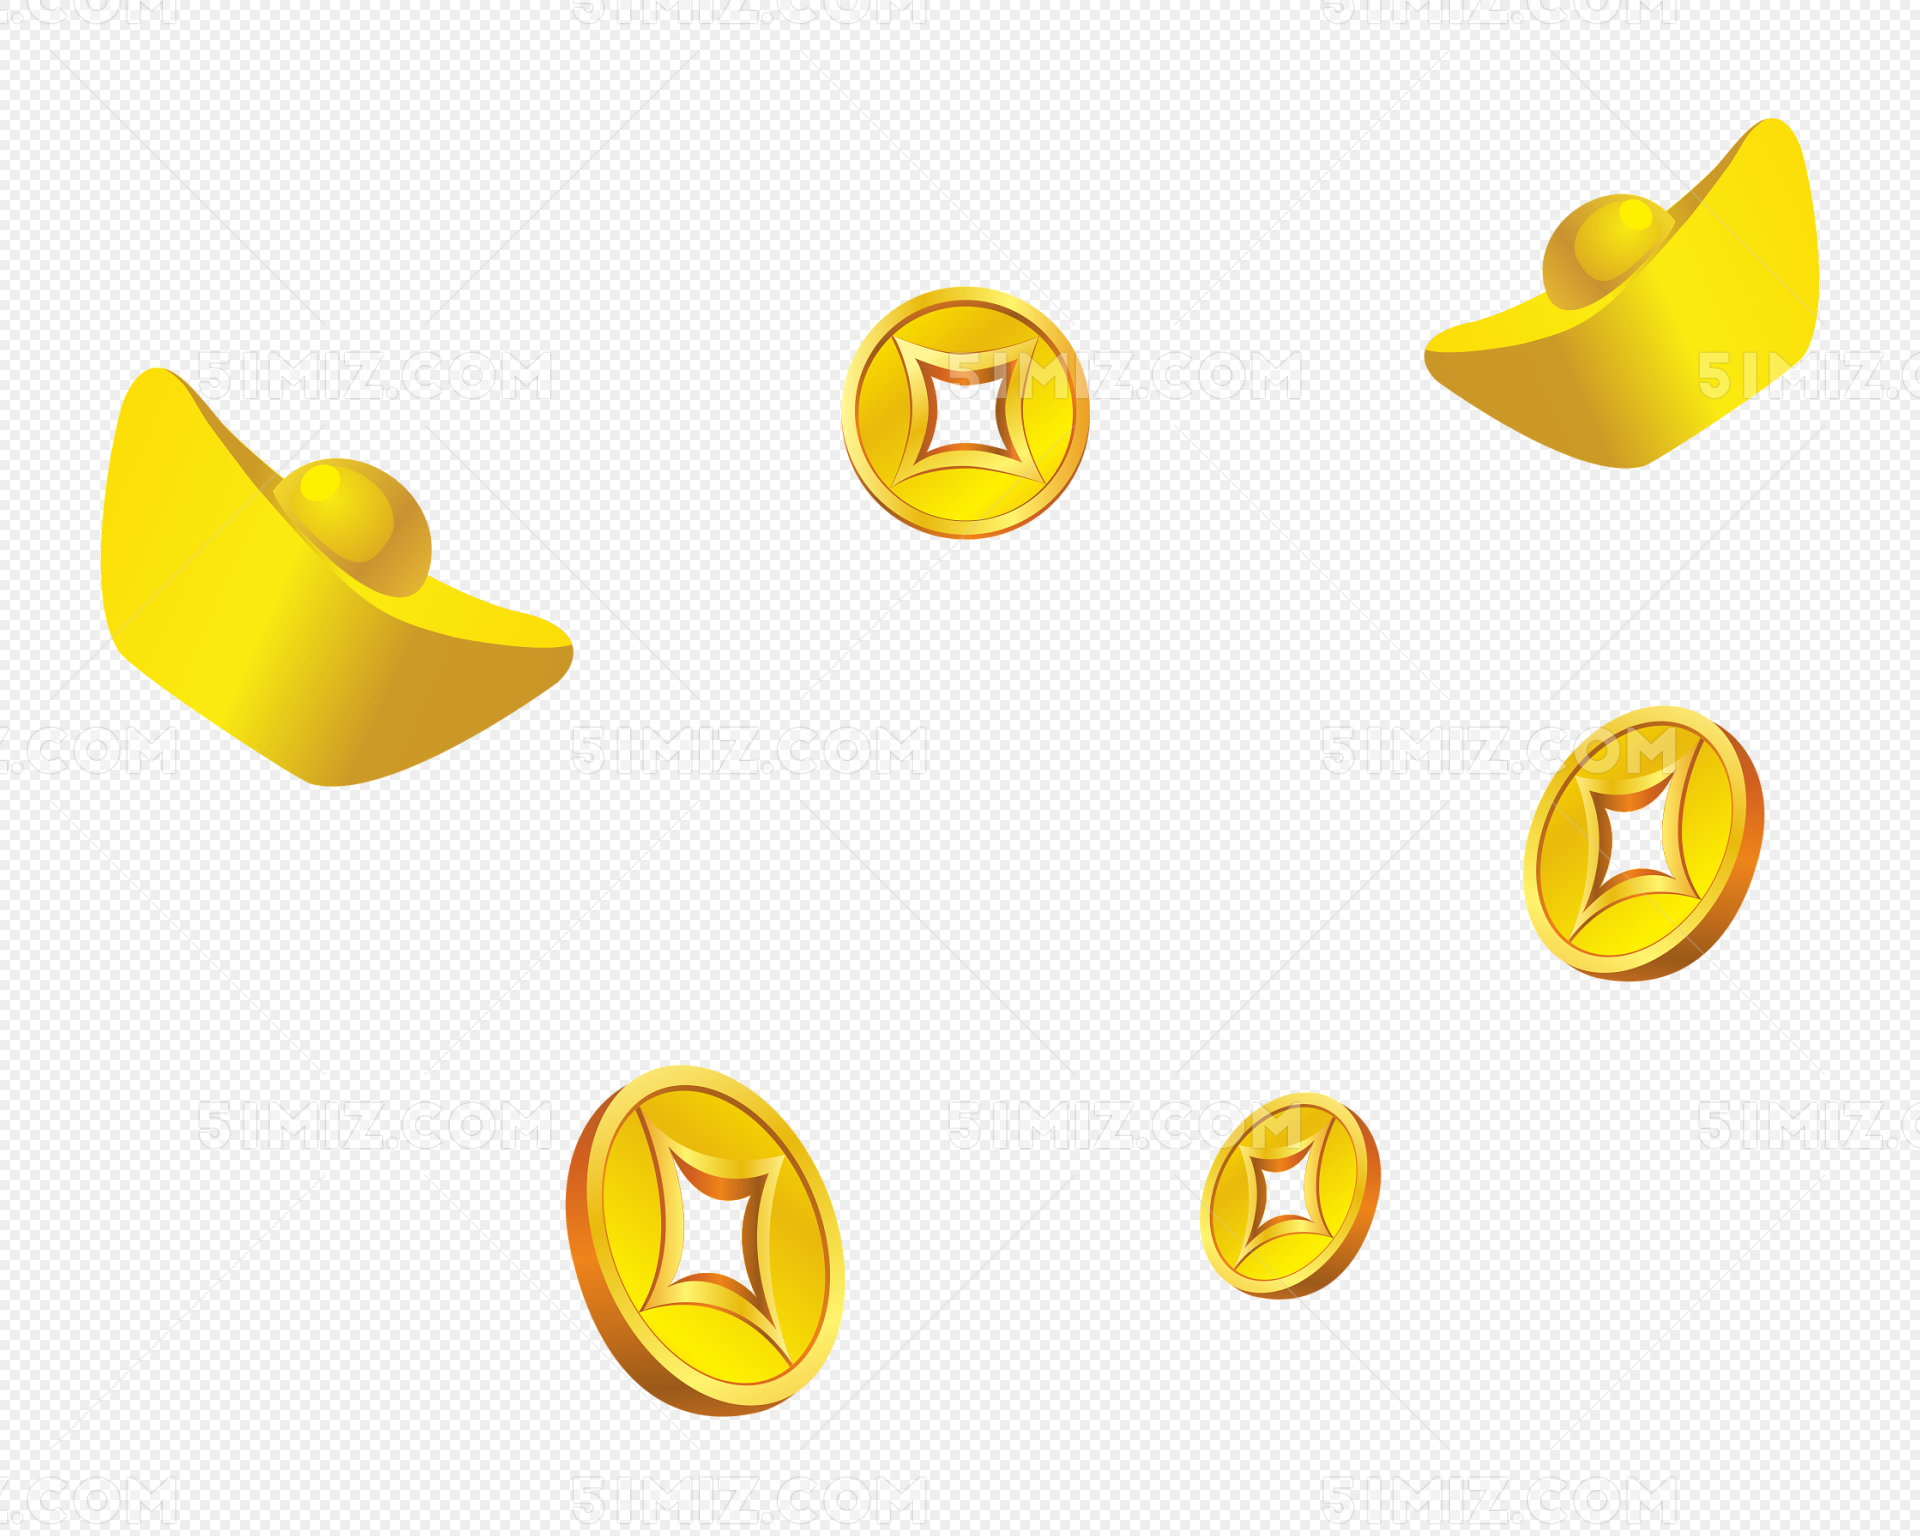 Ingot Gold Vector PNG, Vector, PSD, and Clipart With Transparent ...